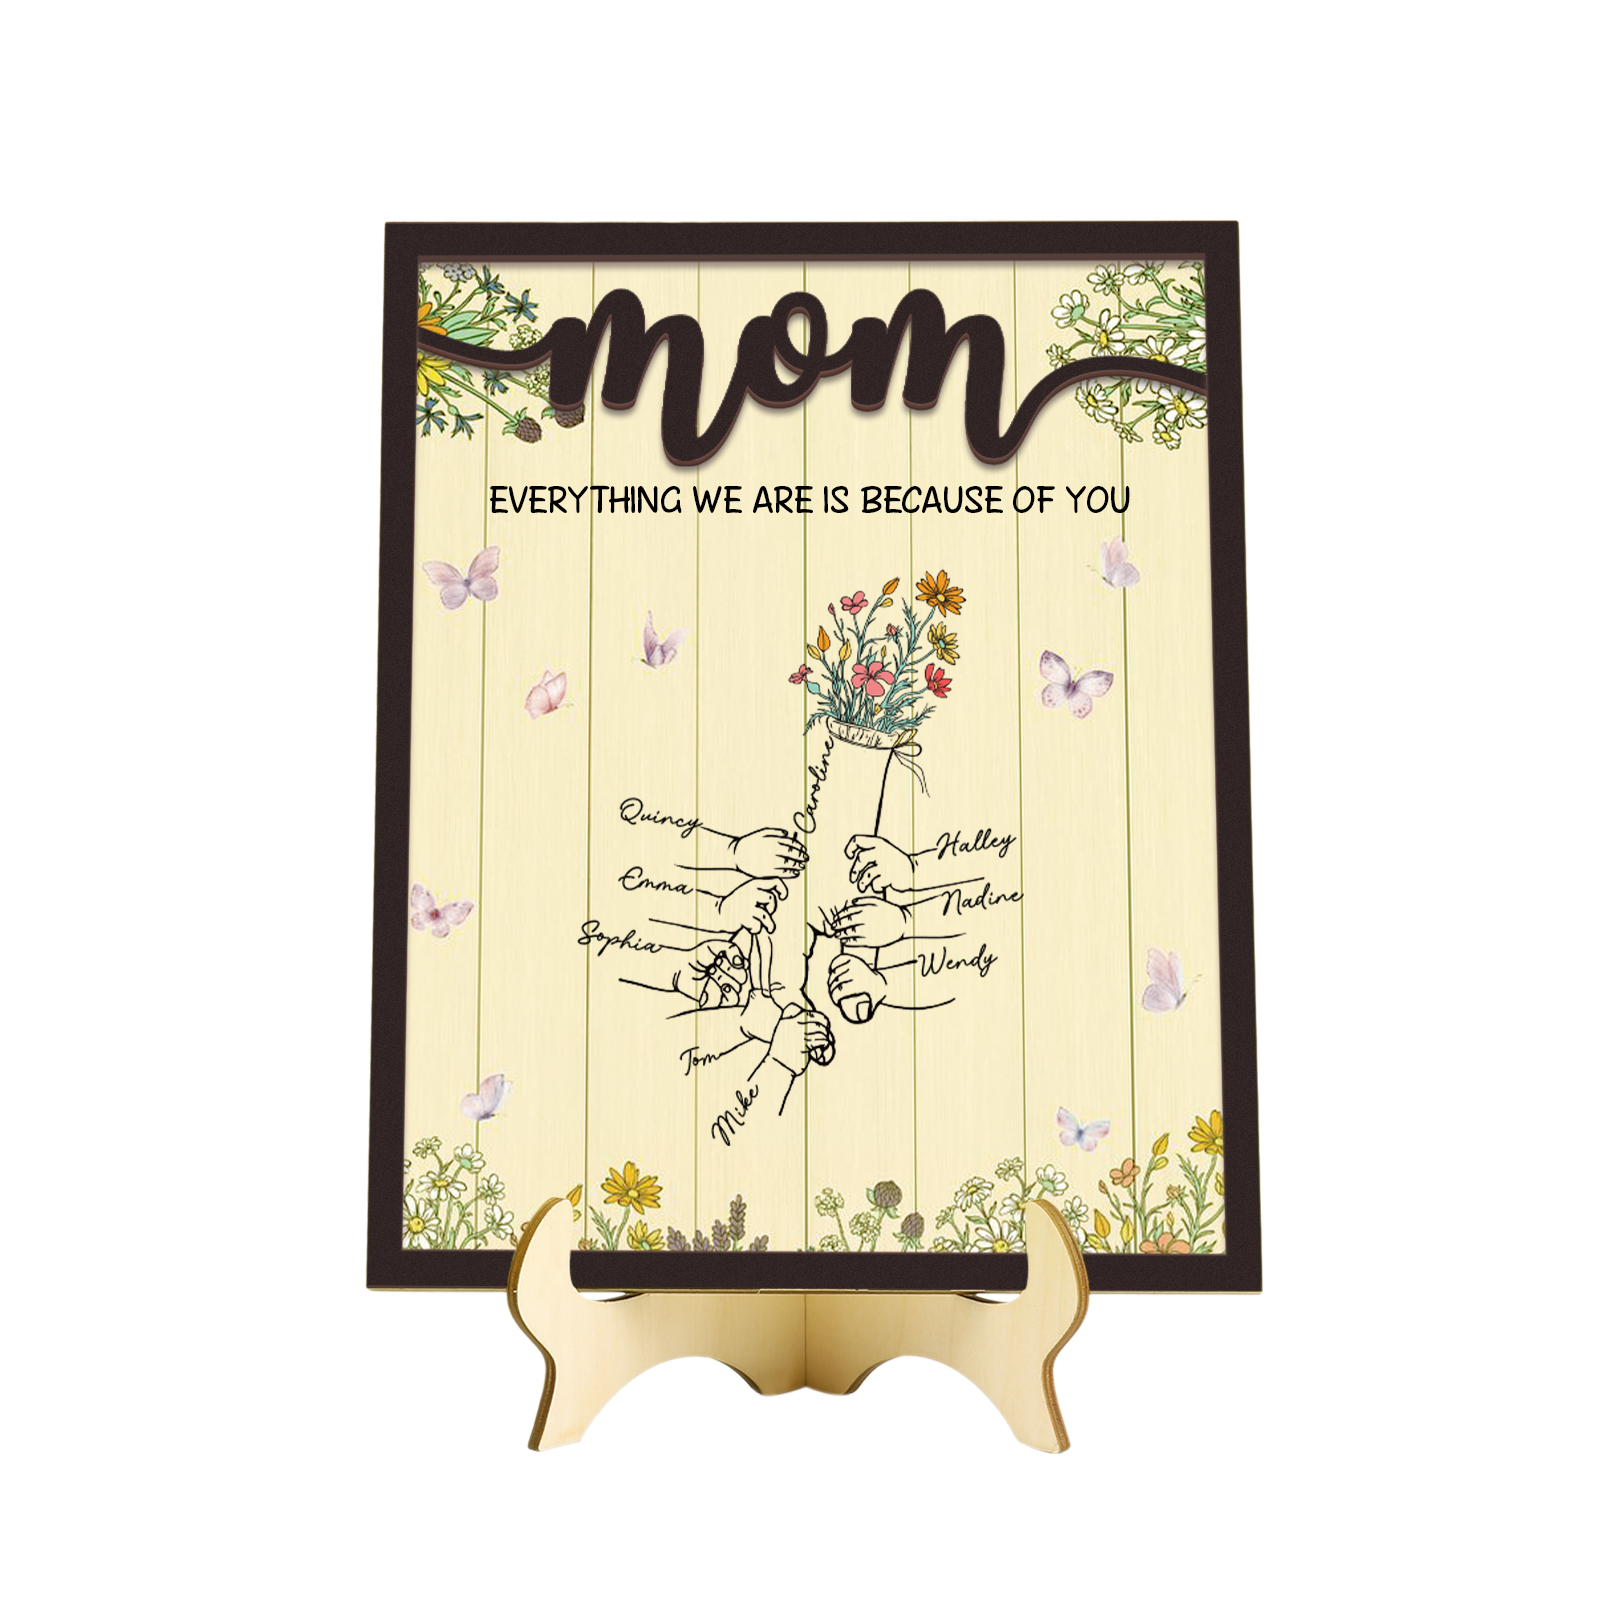 9 Names - Personalized Customizable Text Home Frame Wooden Ornament Holding Hands Flower Elements Style Ornament for Mom